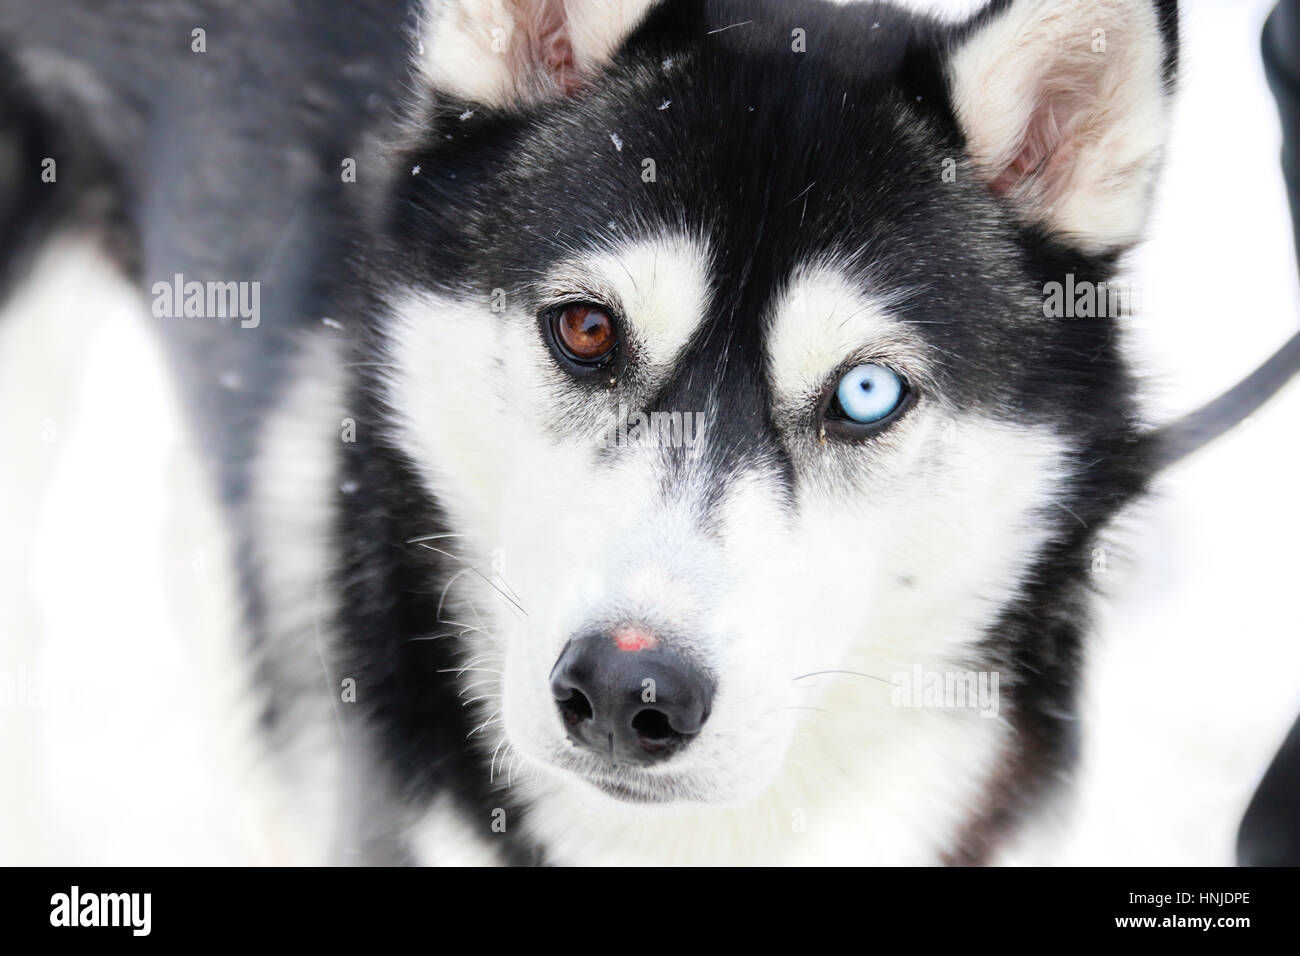 diversity, difference idea, Dog with different eye colors, blurred photo for background Stock Photo